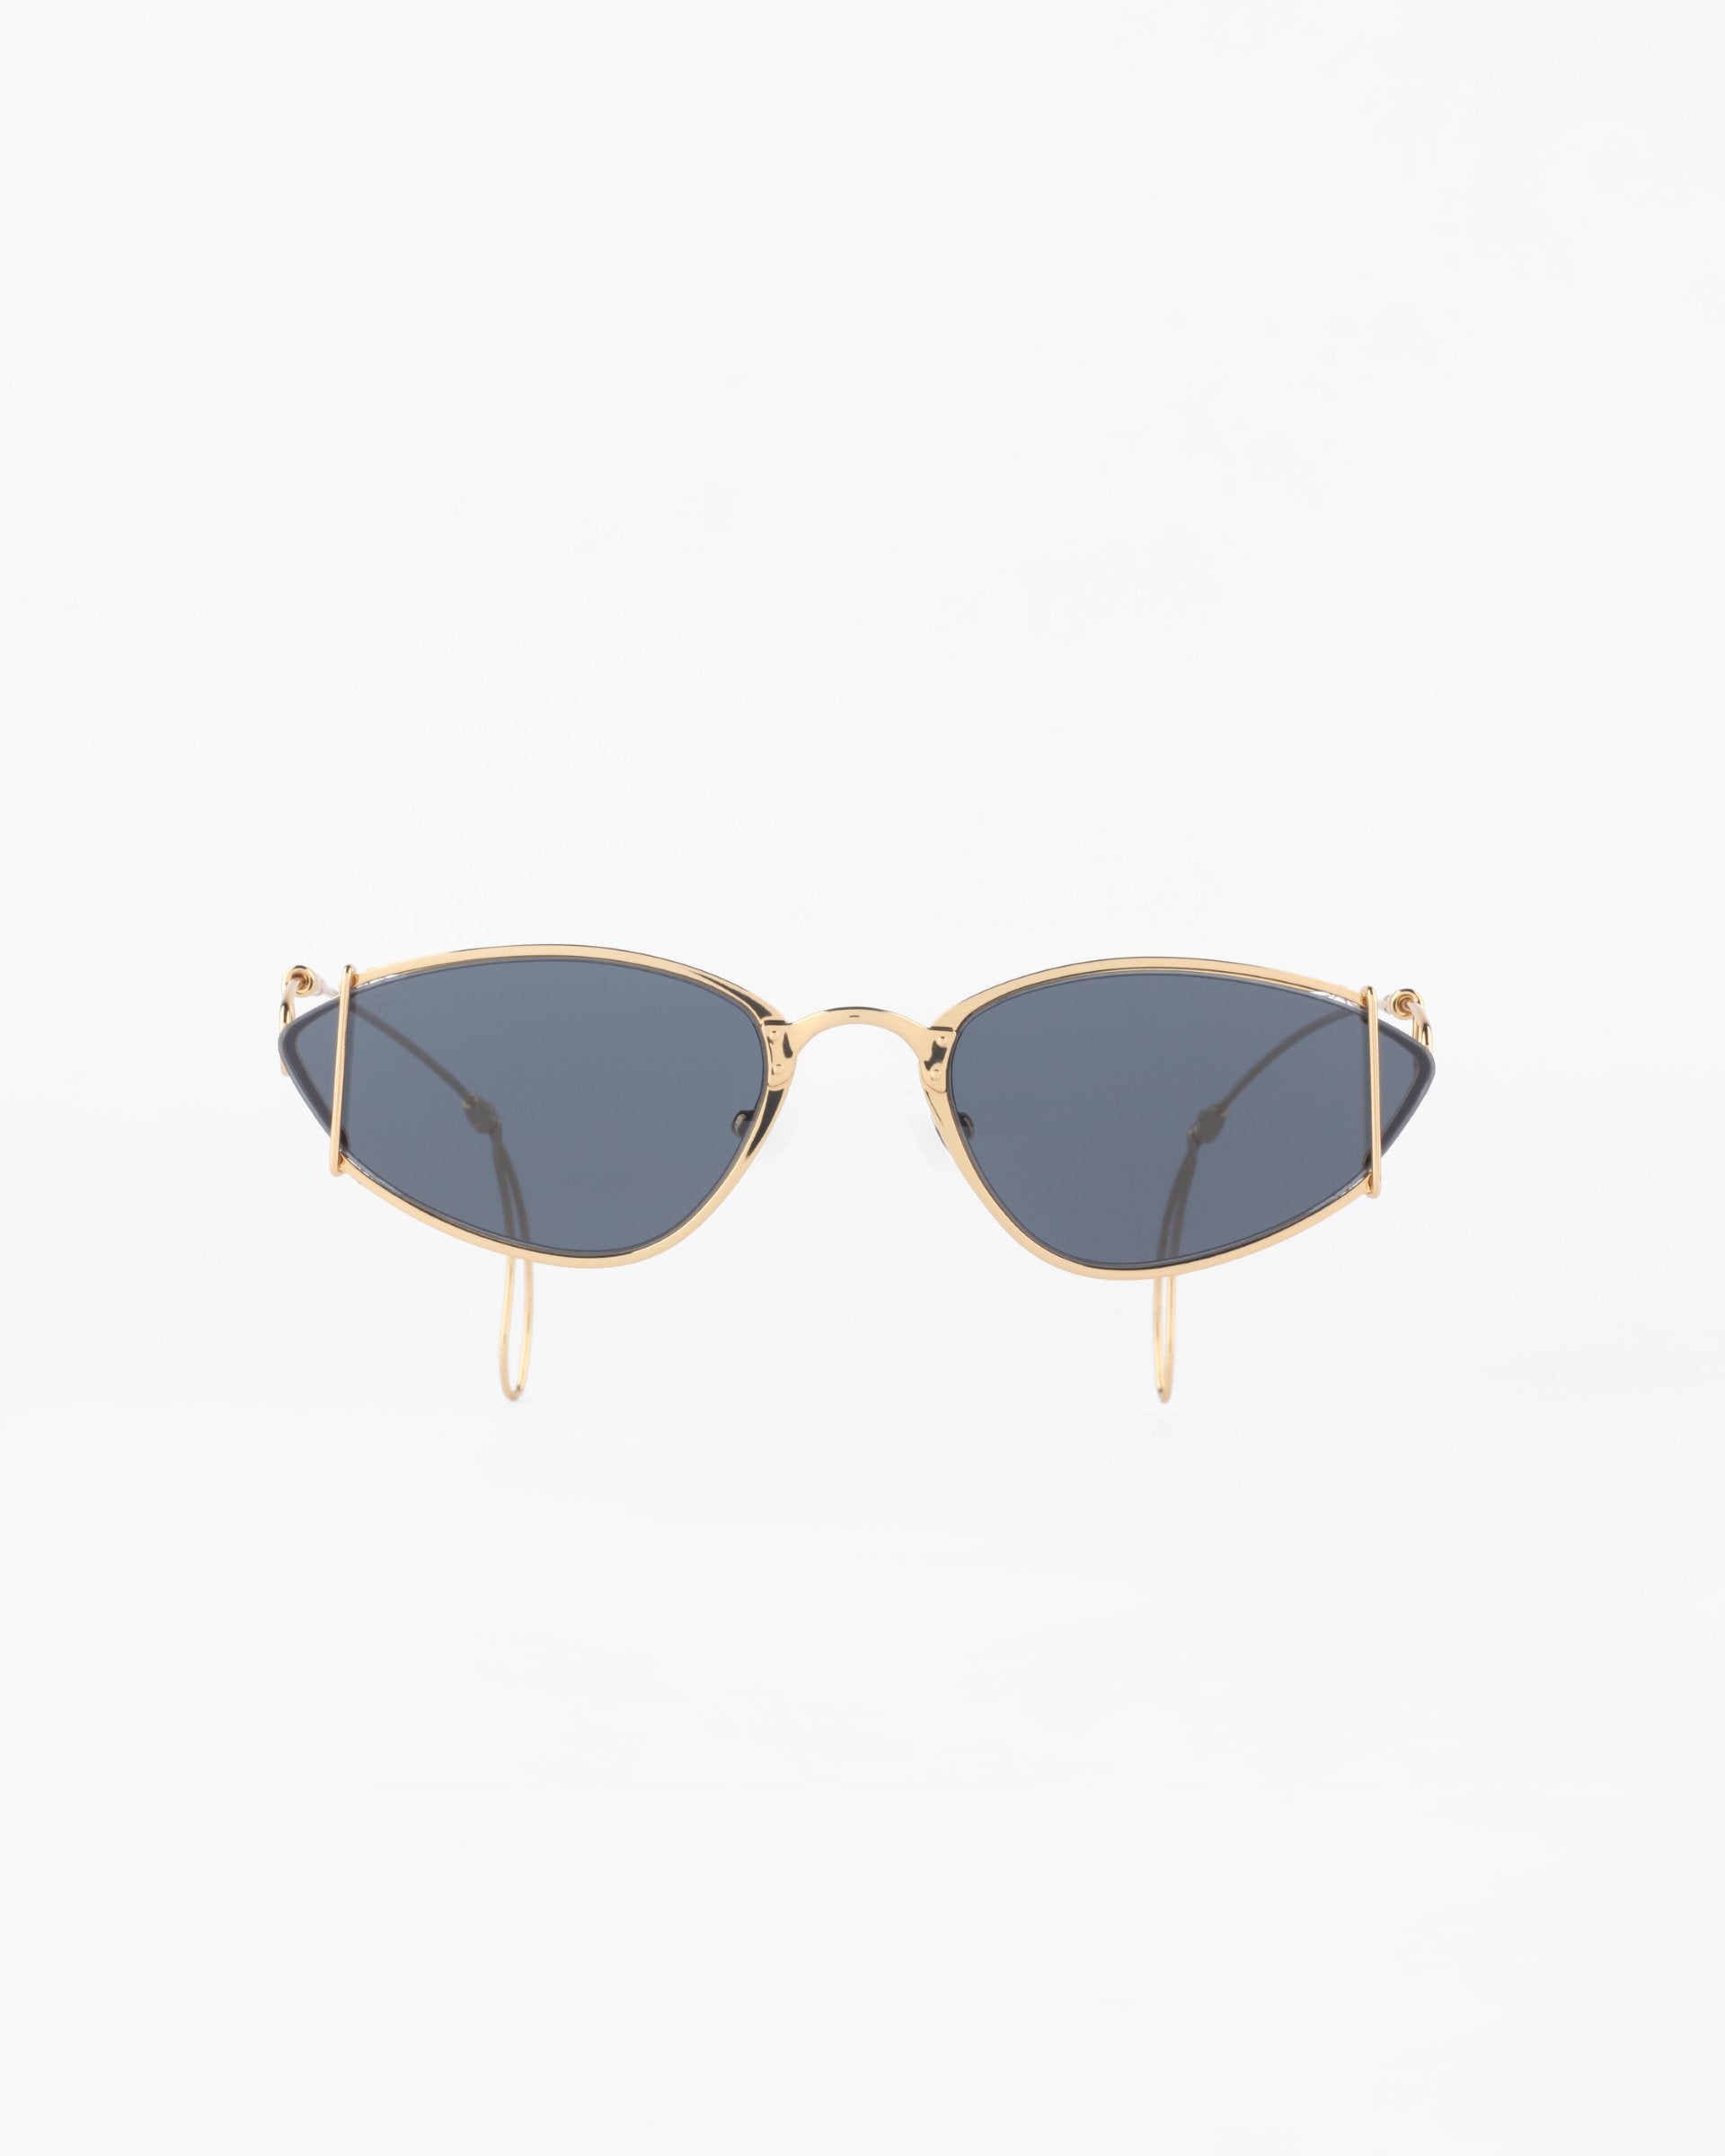 A pair of For Art&#39;s Sake® Ornate sunglasses with an 18-karat gold-plated metal frame and dark blue-tinted, ultra-lightweight nylon lenses. The design features a sleek, minimalist look with thin, curved arms and a slight cat-eye shape. Offering 100% UVA &amp; UVB protection, the background is plain white.